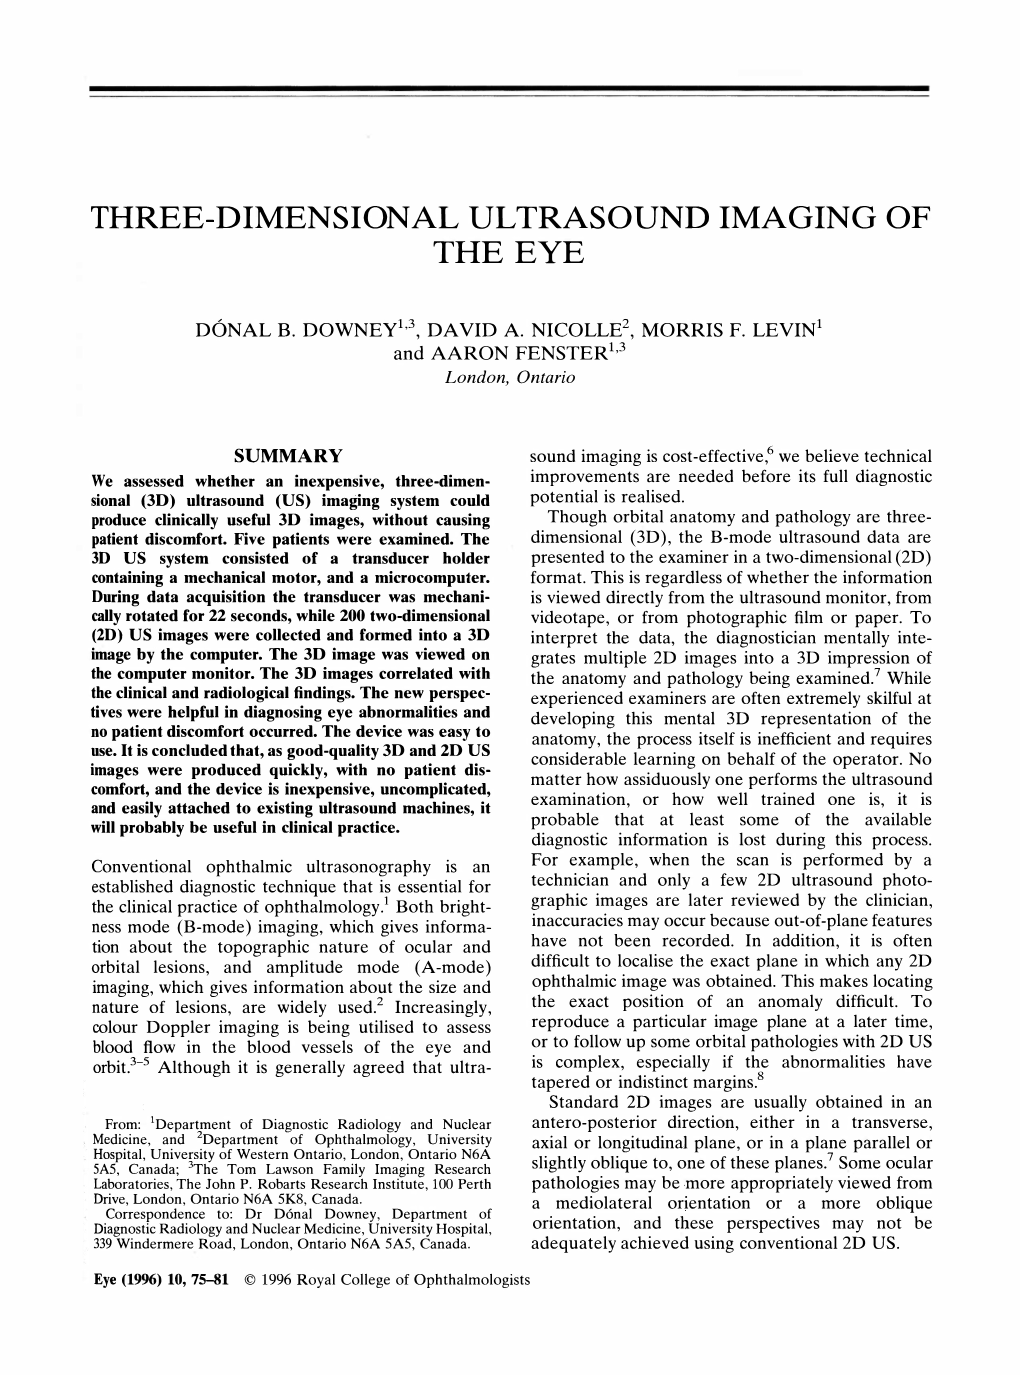 Three-Dimensional Ultrasound Imaging of the Eye